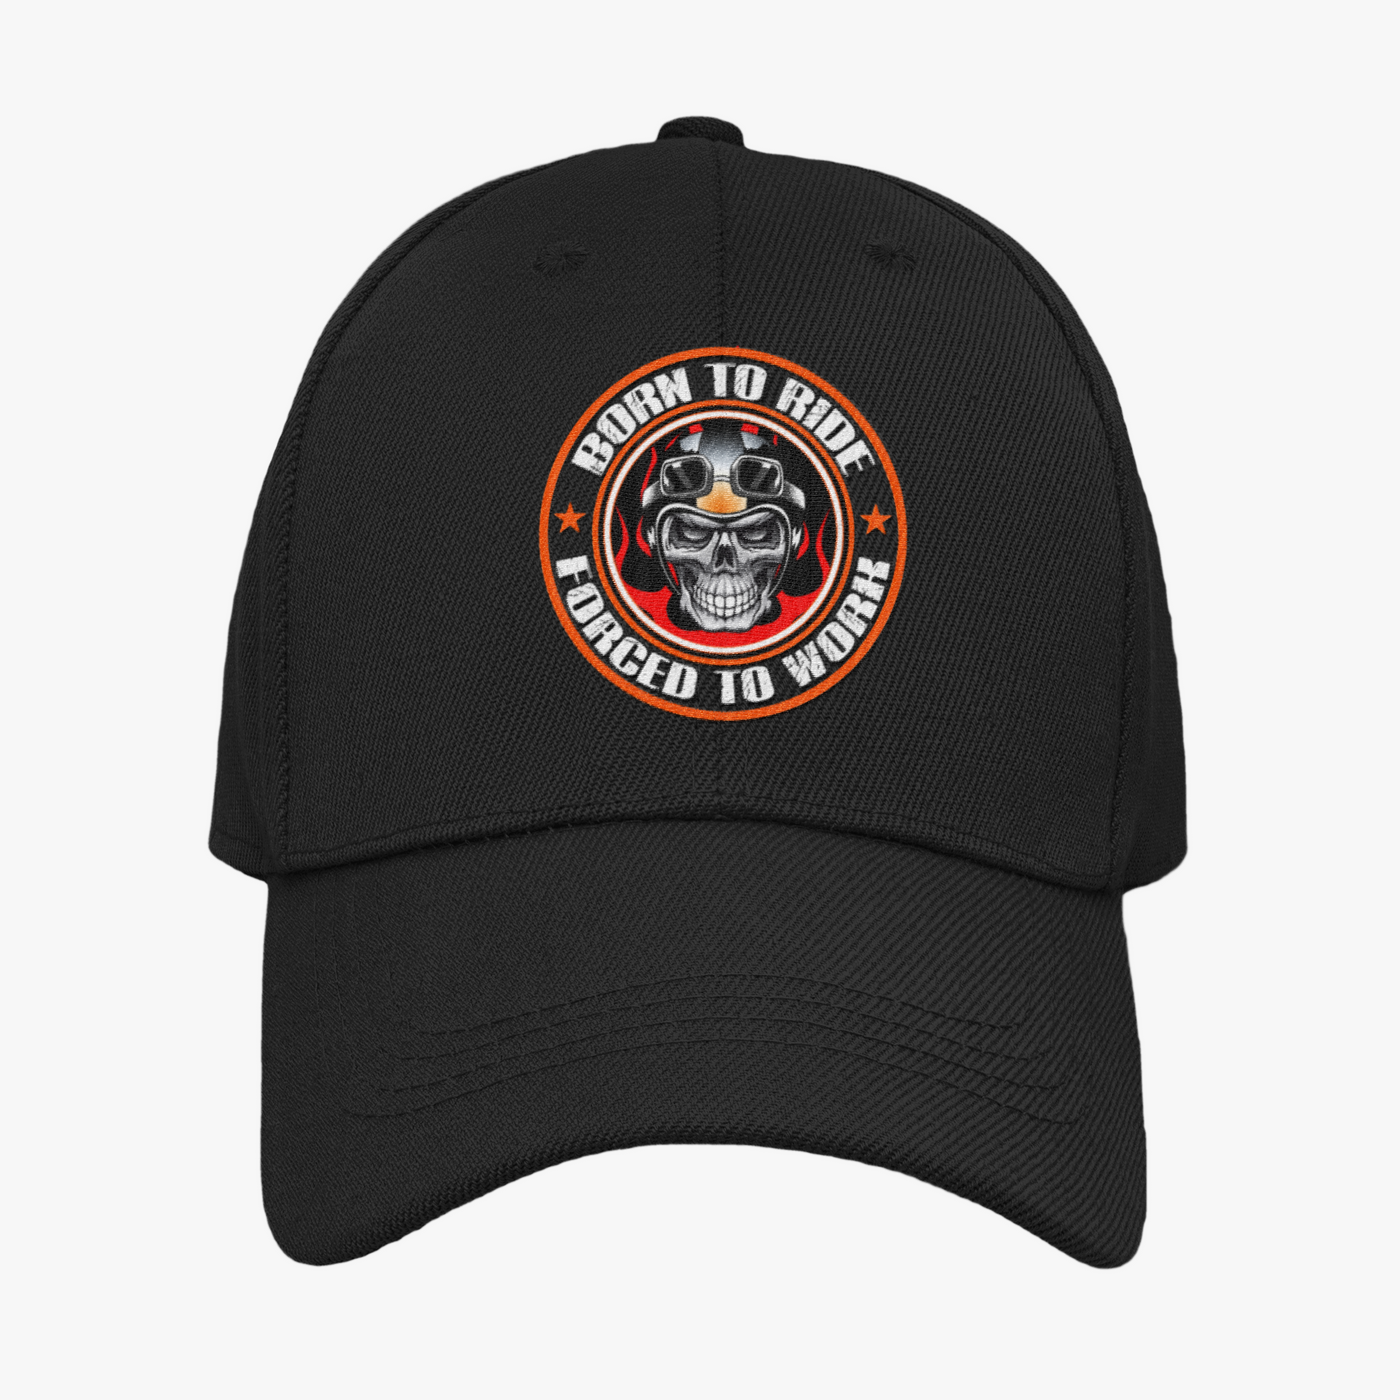 Best Unisex caps for Men and Women in India online, Bikers caps, Trucker caps, Baseball caps, Rugby caps,t shirts,jackets, patches, bandanas,helmet liners,badges,hoodies for riders and fashion forward